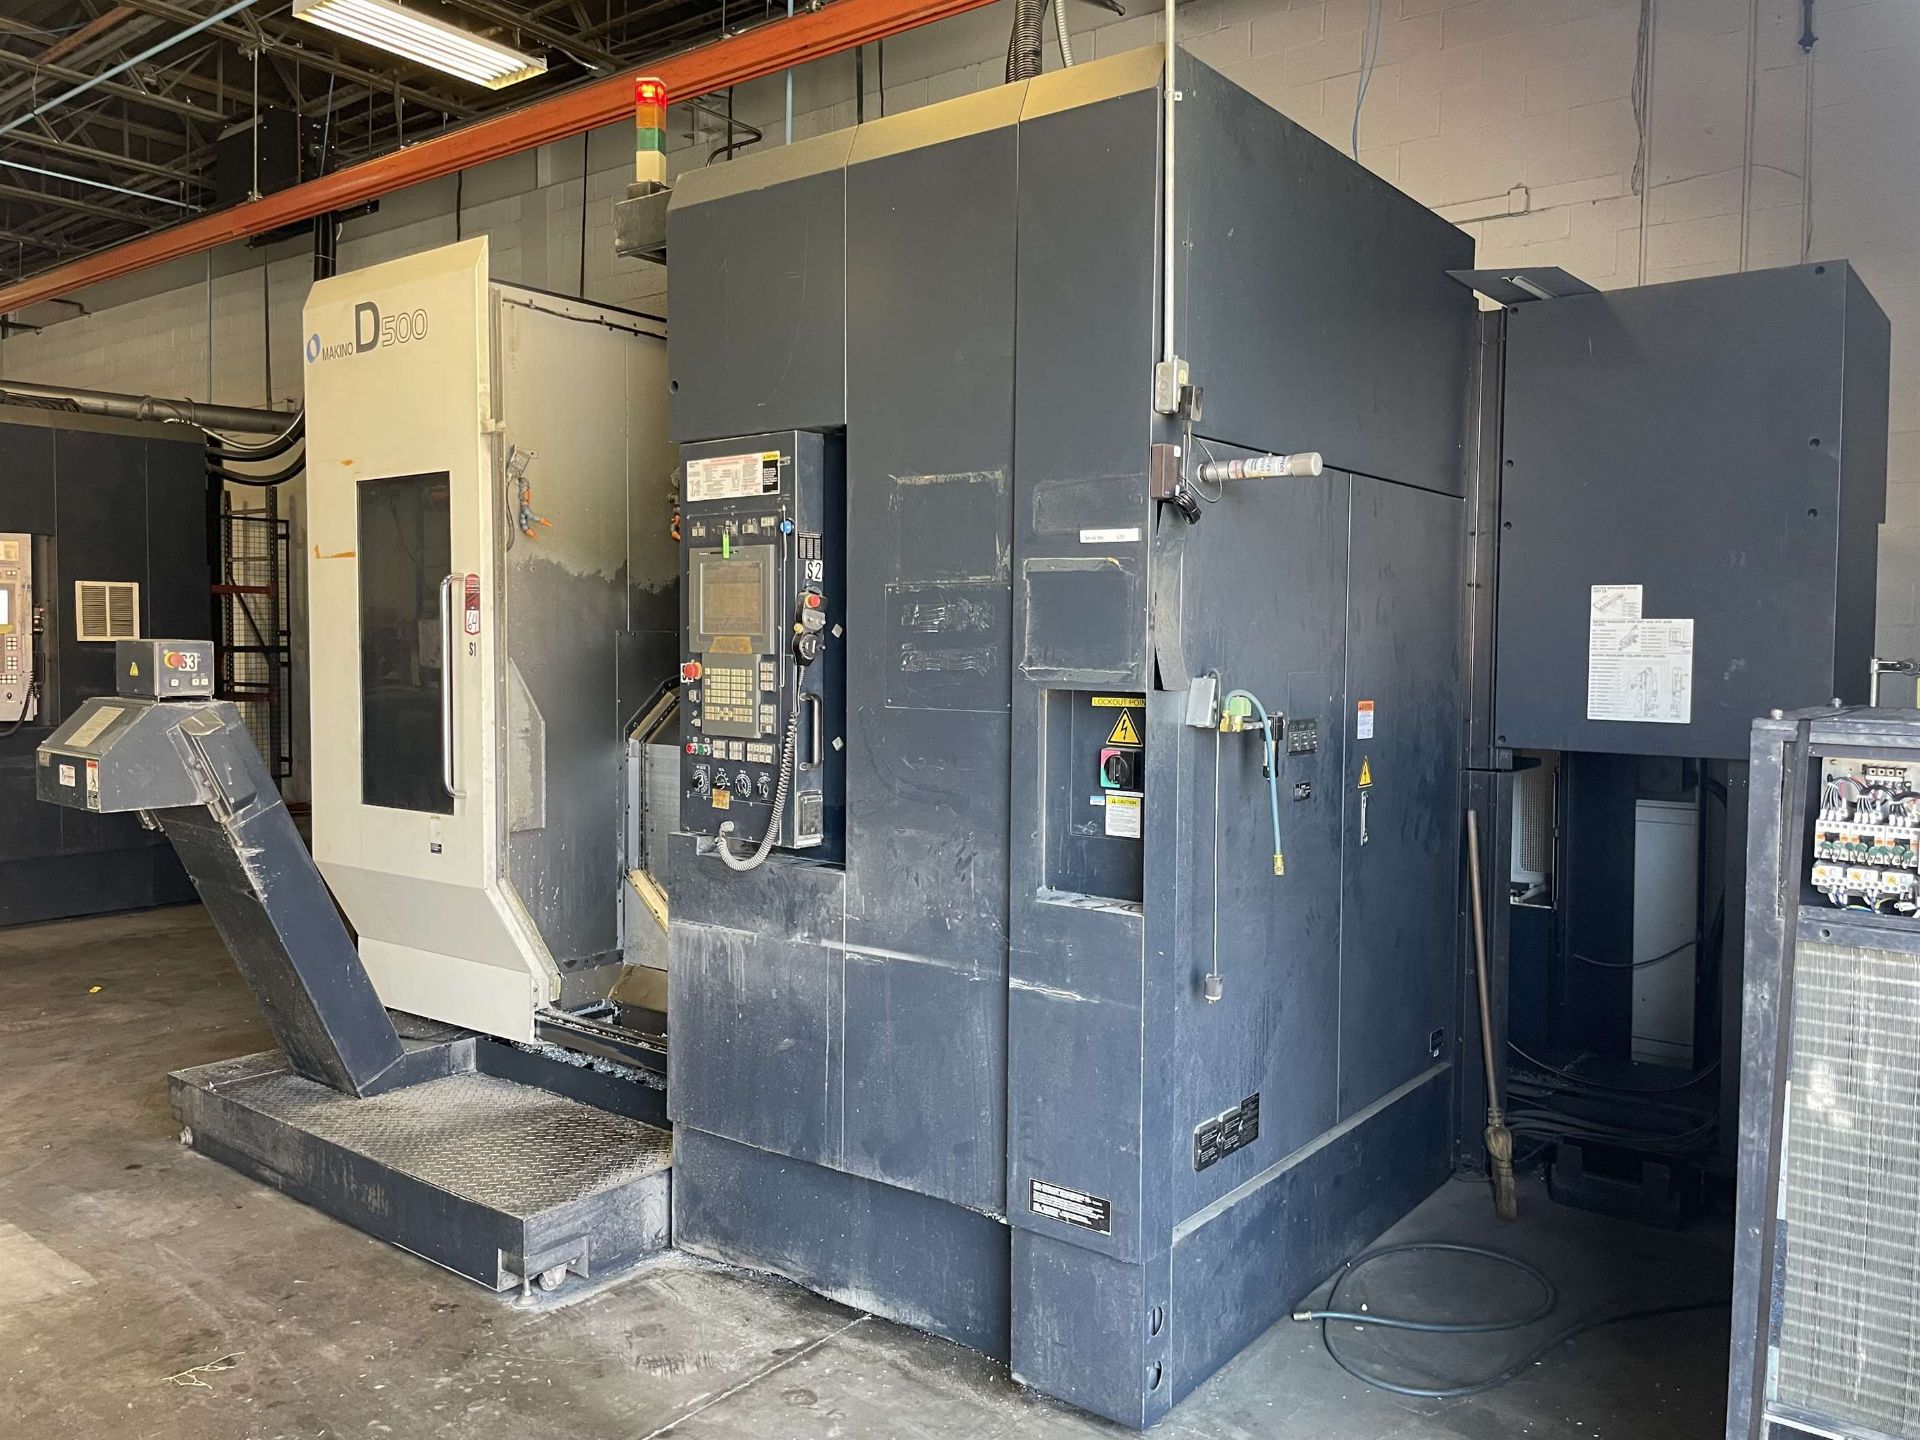 2012 MAKINO D500 5-Axis Vertical Machining Center, s/n 125, w/ PROFESSIONAL 5 Control, (2) 15.75”